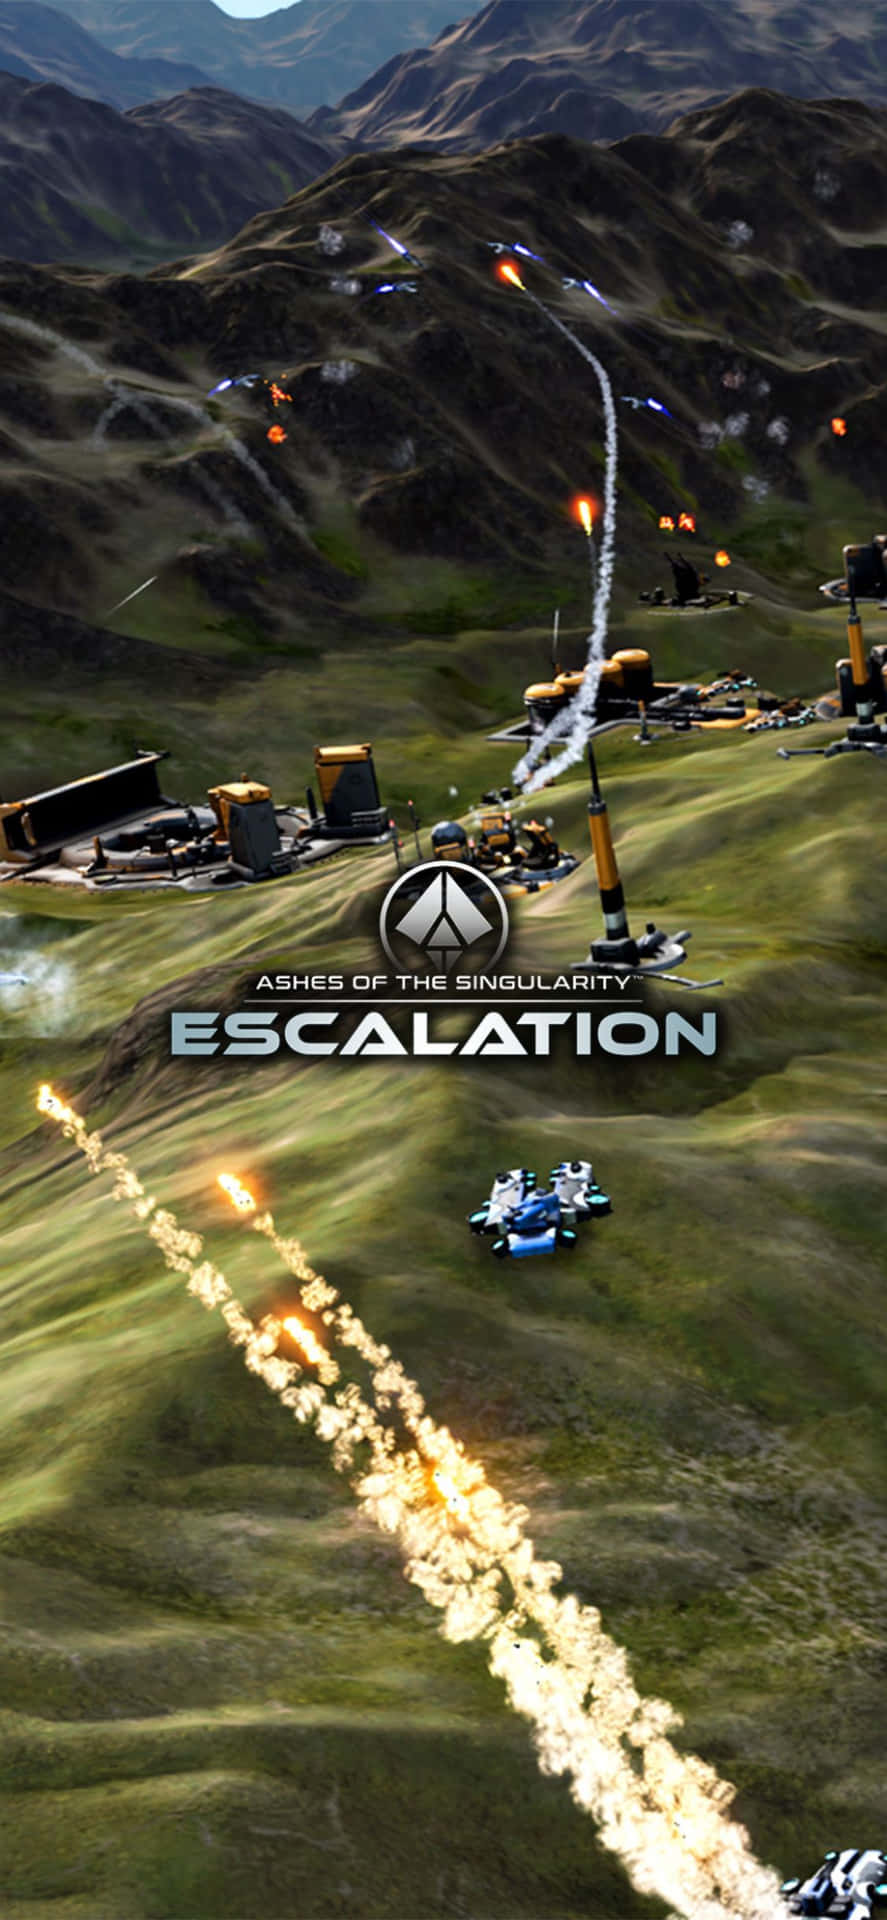 Game on with iPhone X and Ashes Of The Singularity Escalation